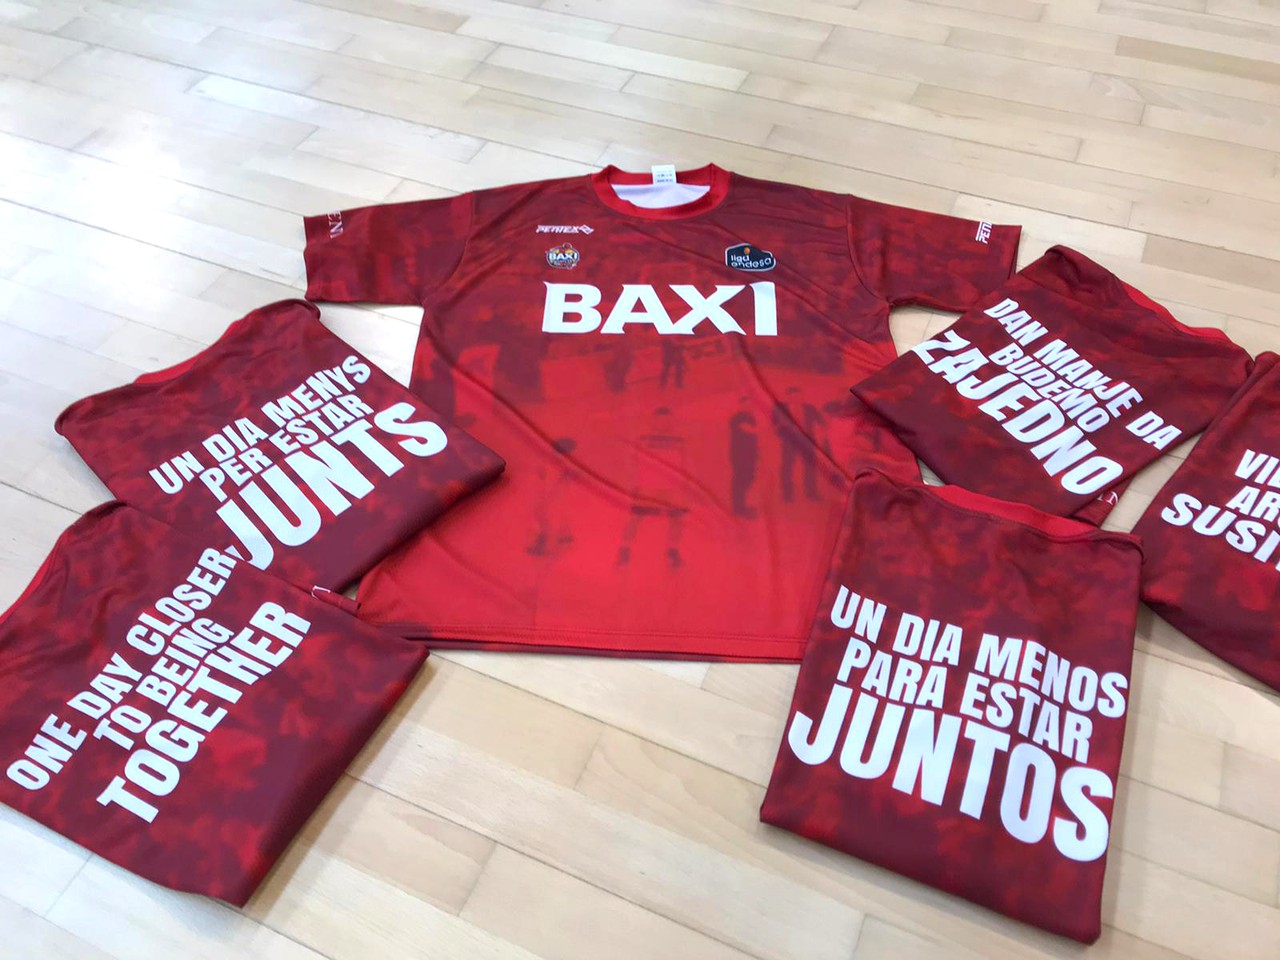 Check out the winners of the special t-shirt dedicated to BAXI Manresa subscribers